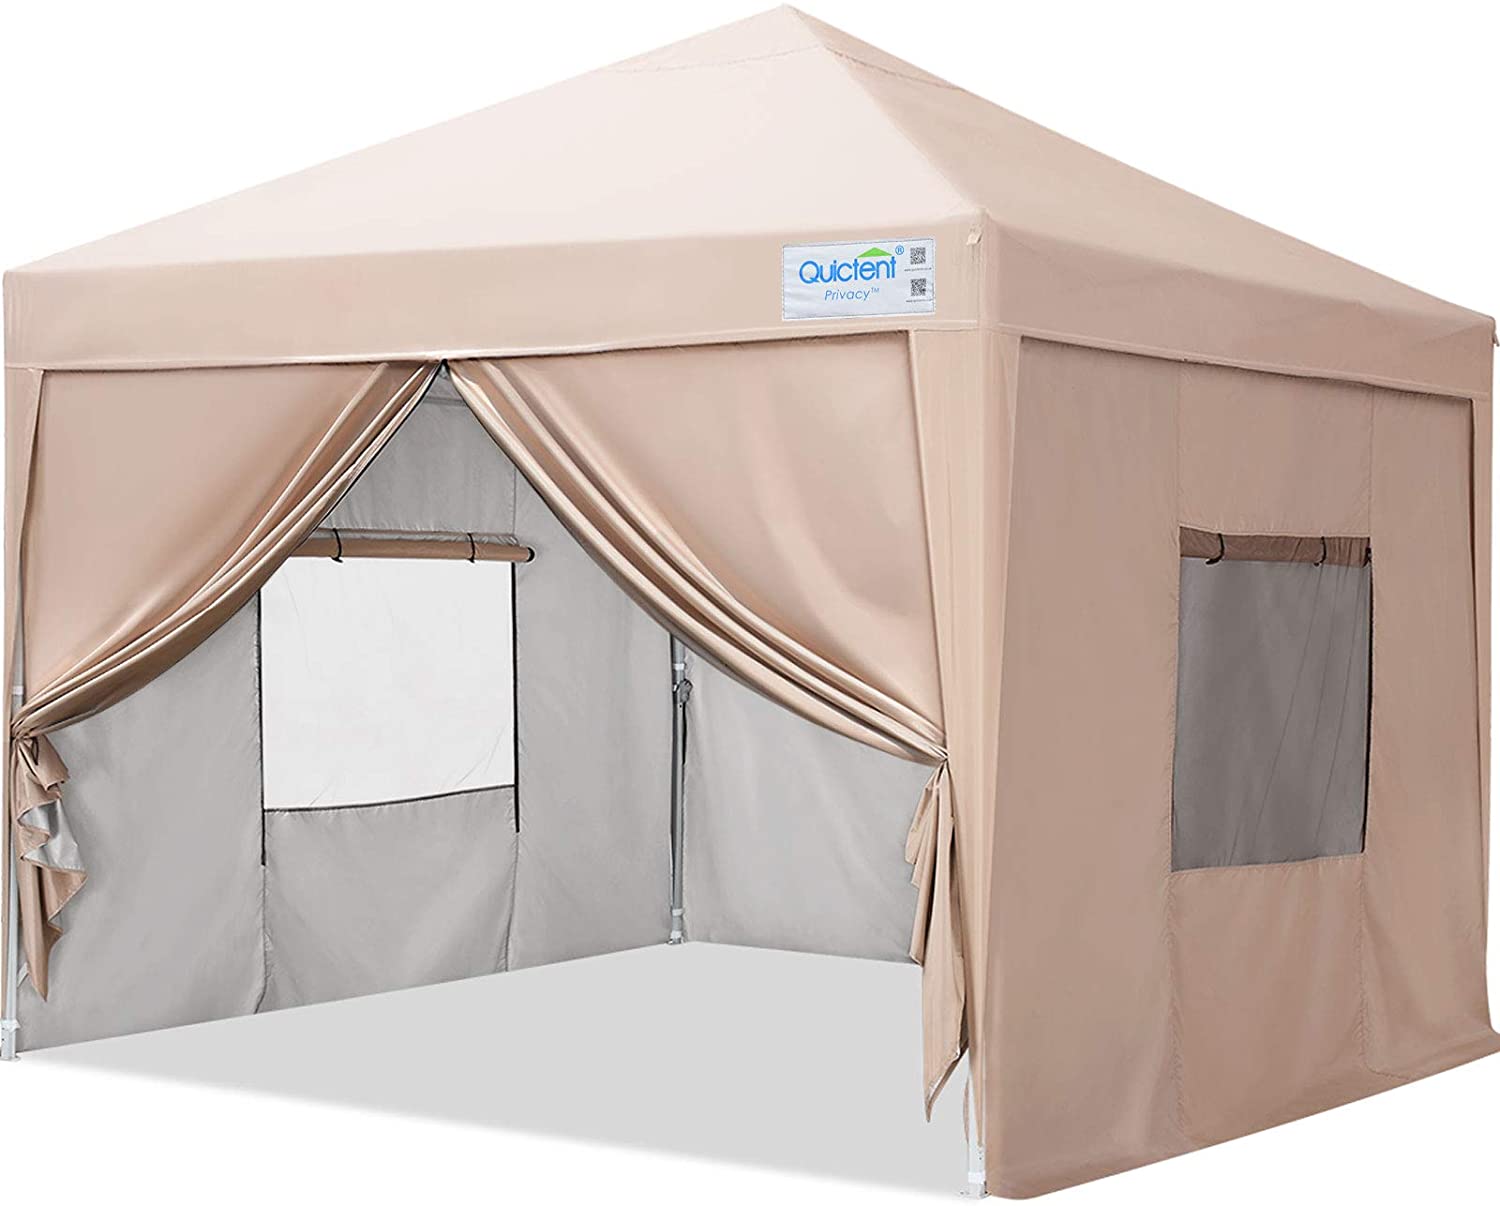 Quictent Reinforced Privacy Pop-Up Canopy Tent With Sidewalls